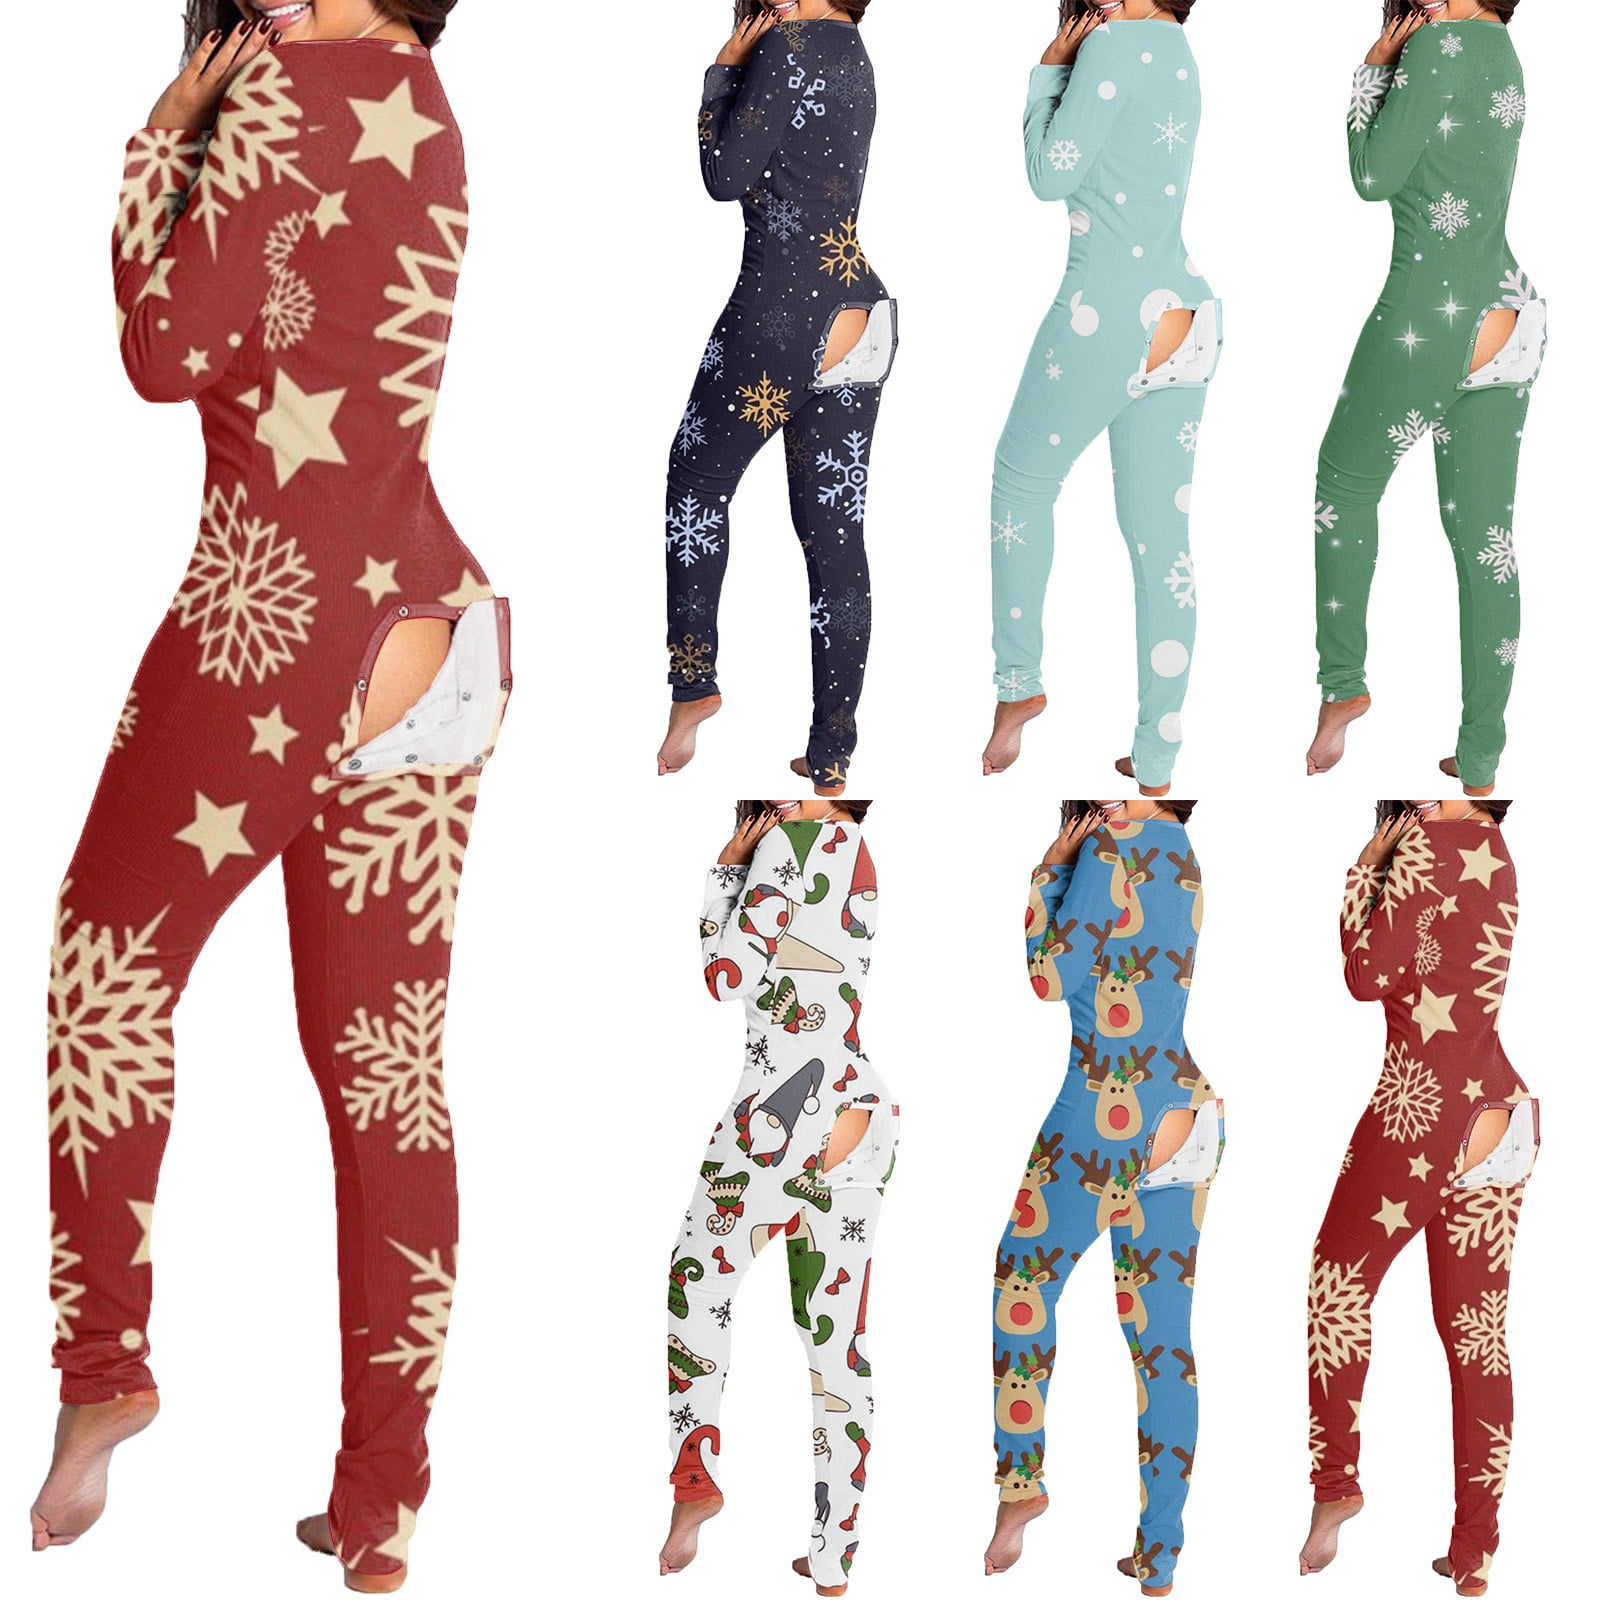 VerPetridure Women's Christmas Long Sleeve Button Down Jumpsuits for ...